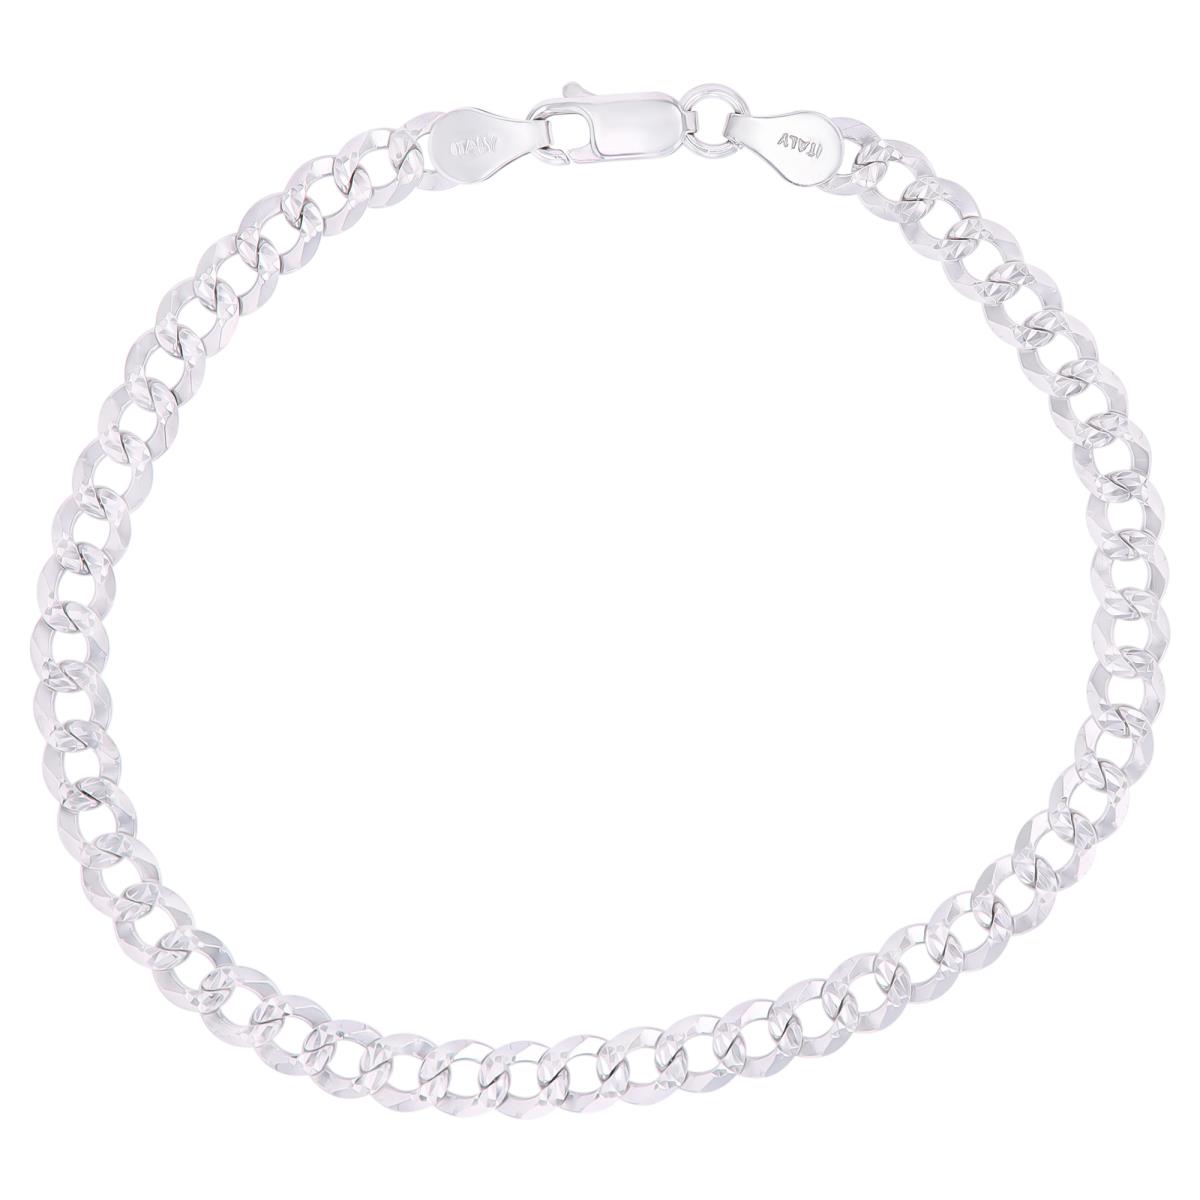 Sterling Silver Anti-Tarnish DC 5mm 150 Curb Pave 10"Chain